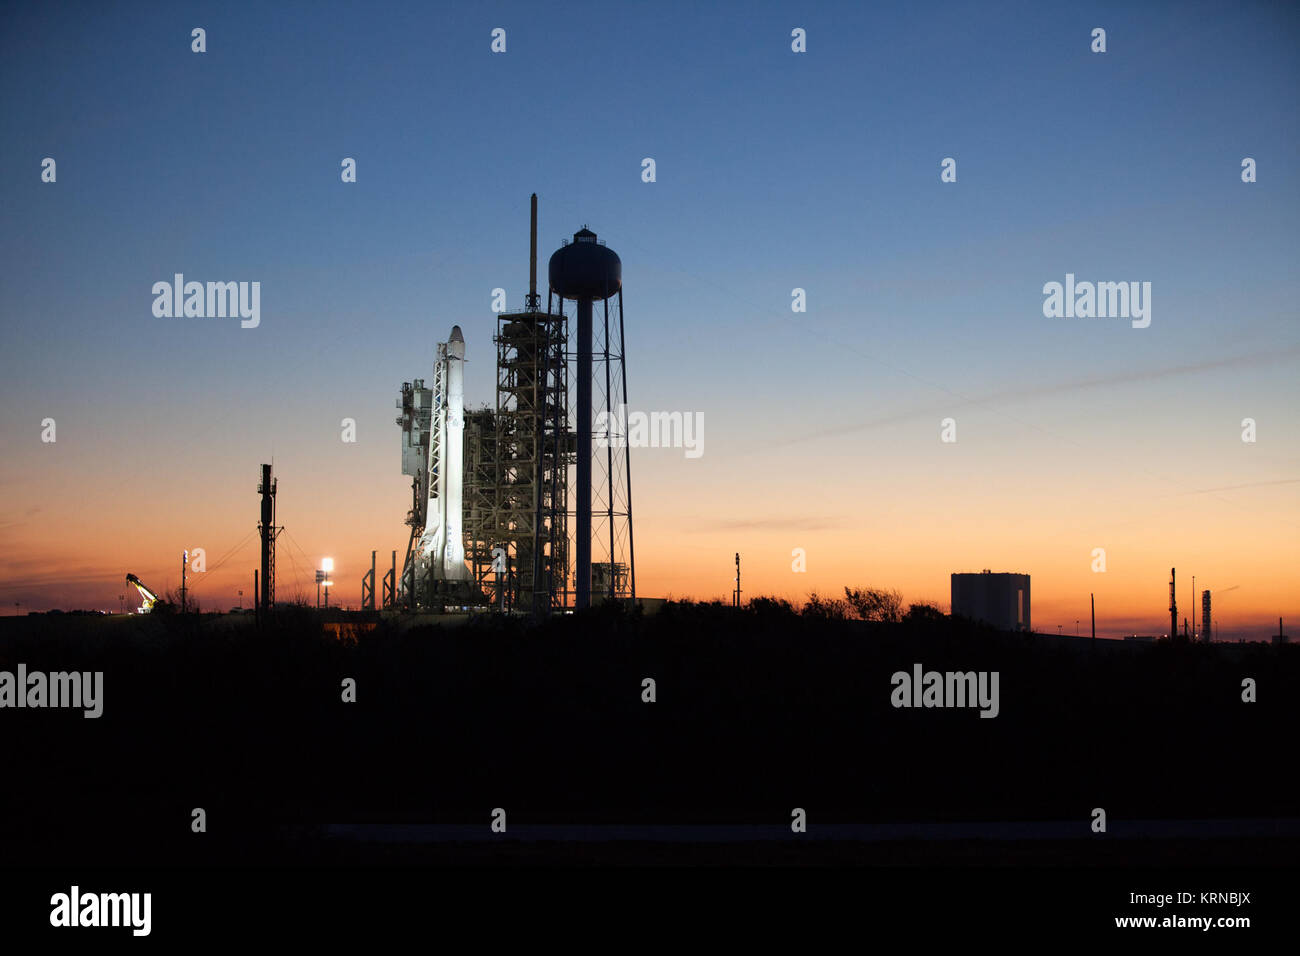 As sun sets, a Falcon 9 rocket stands ready for liftoff at the Kennedy Space Center's Launch Complex 39A. The historic launch site now is operated by SpaceX under a property agreement signed with NASA. In the background is the Vehicle Assembly Building. The rocket will boost a Dragon resupply spacecraft to the International Space Station. Liftoff is scheduled for 10:01 a.m. EST on Feb. 18. On its 10th commercial resupply services mission to the space station, Dragon will bring up 5,000 pounds of supplies, such as the Stratospheric Aerosol and Gas Experiment (SAGE) III instrument to further stu Stock Photo